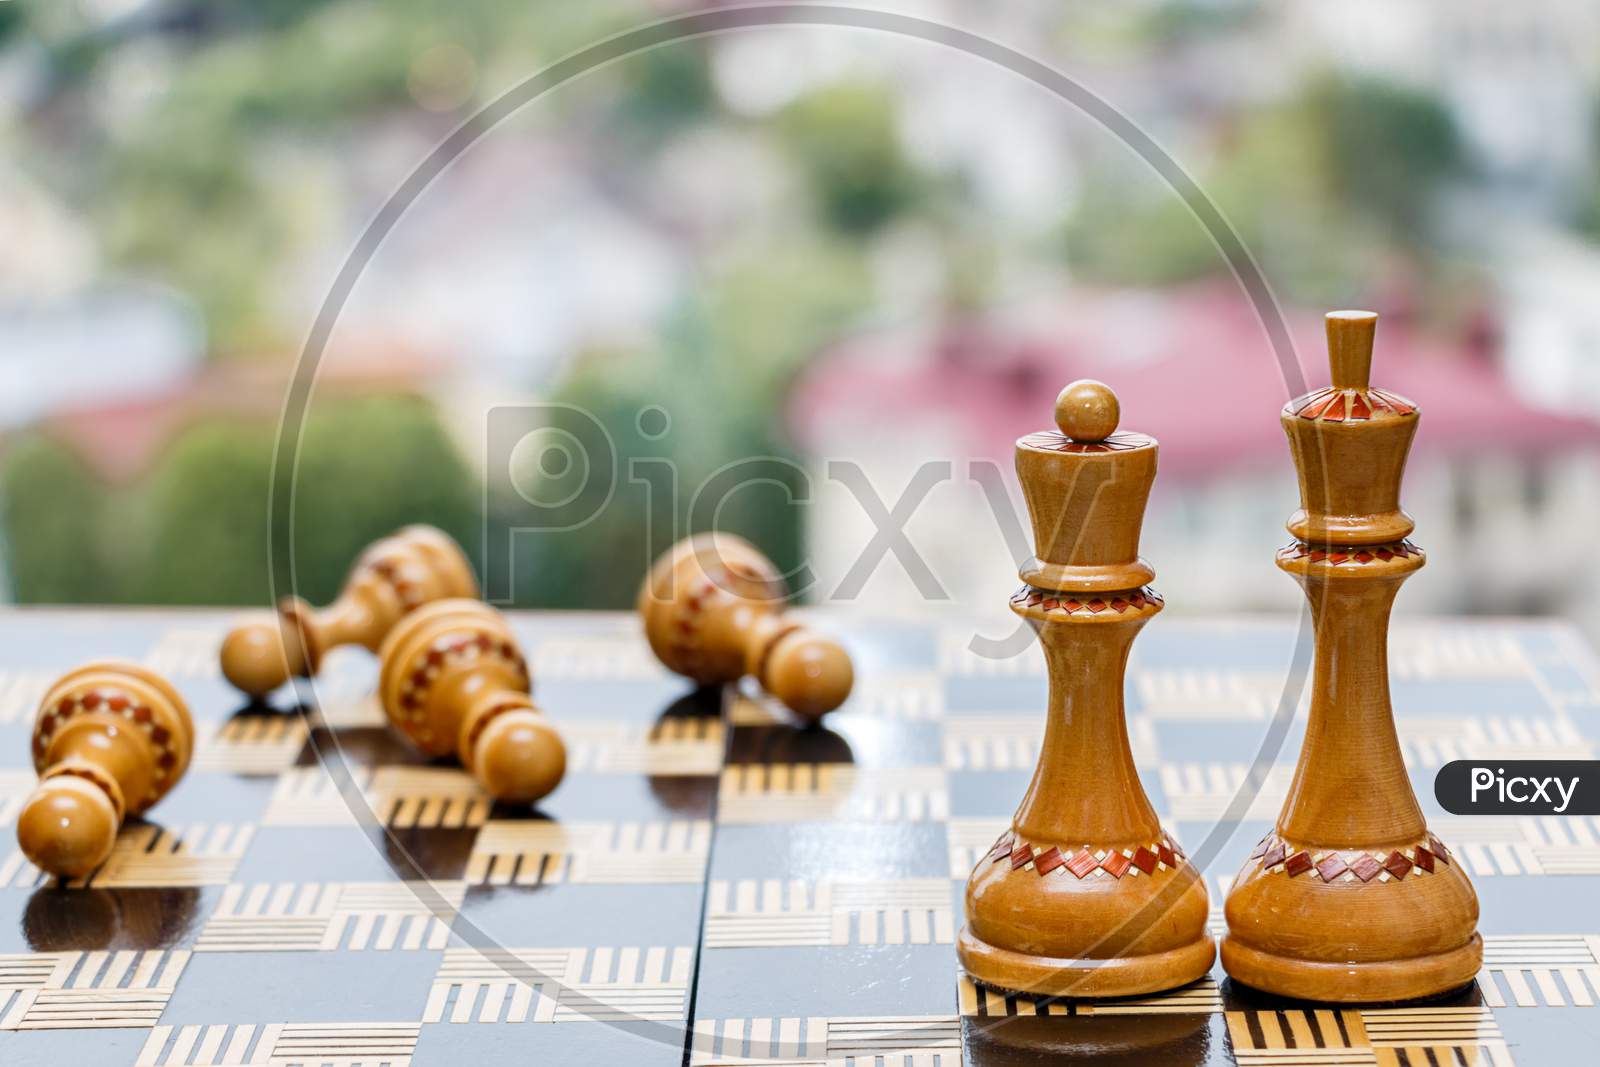 Chessboard with figures on a blurred background